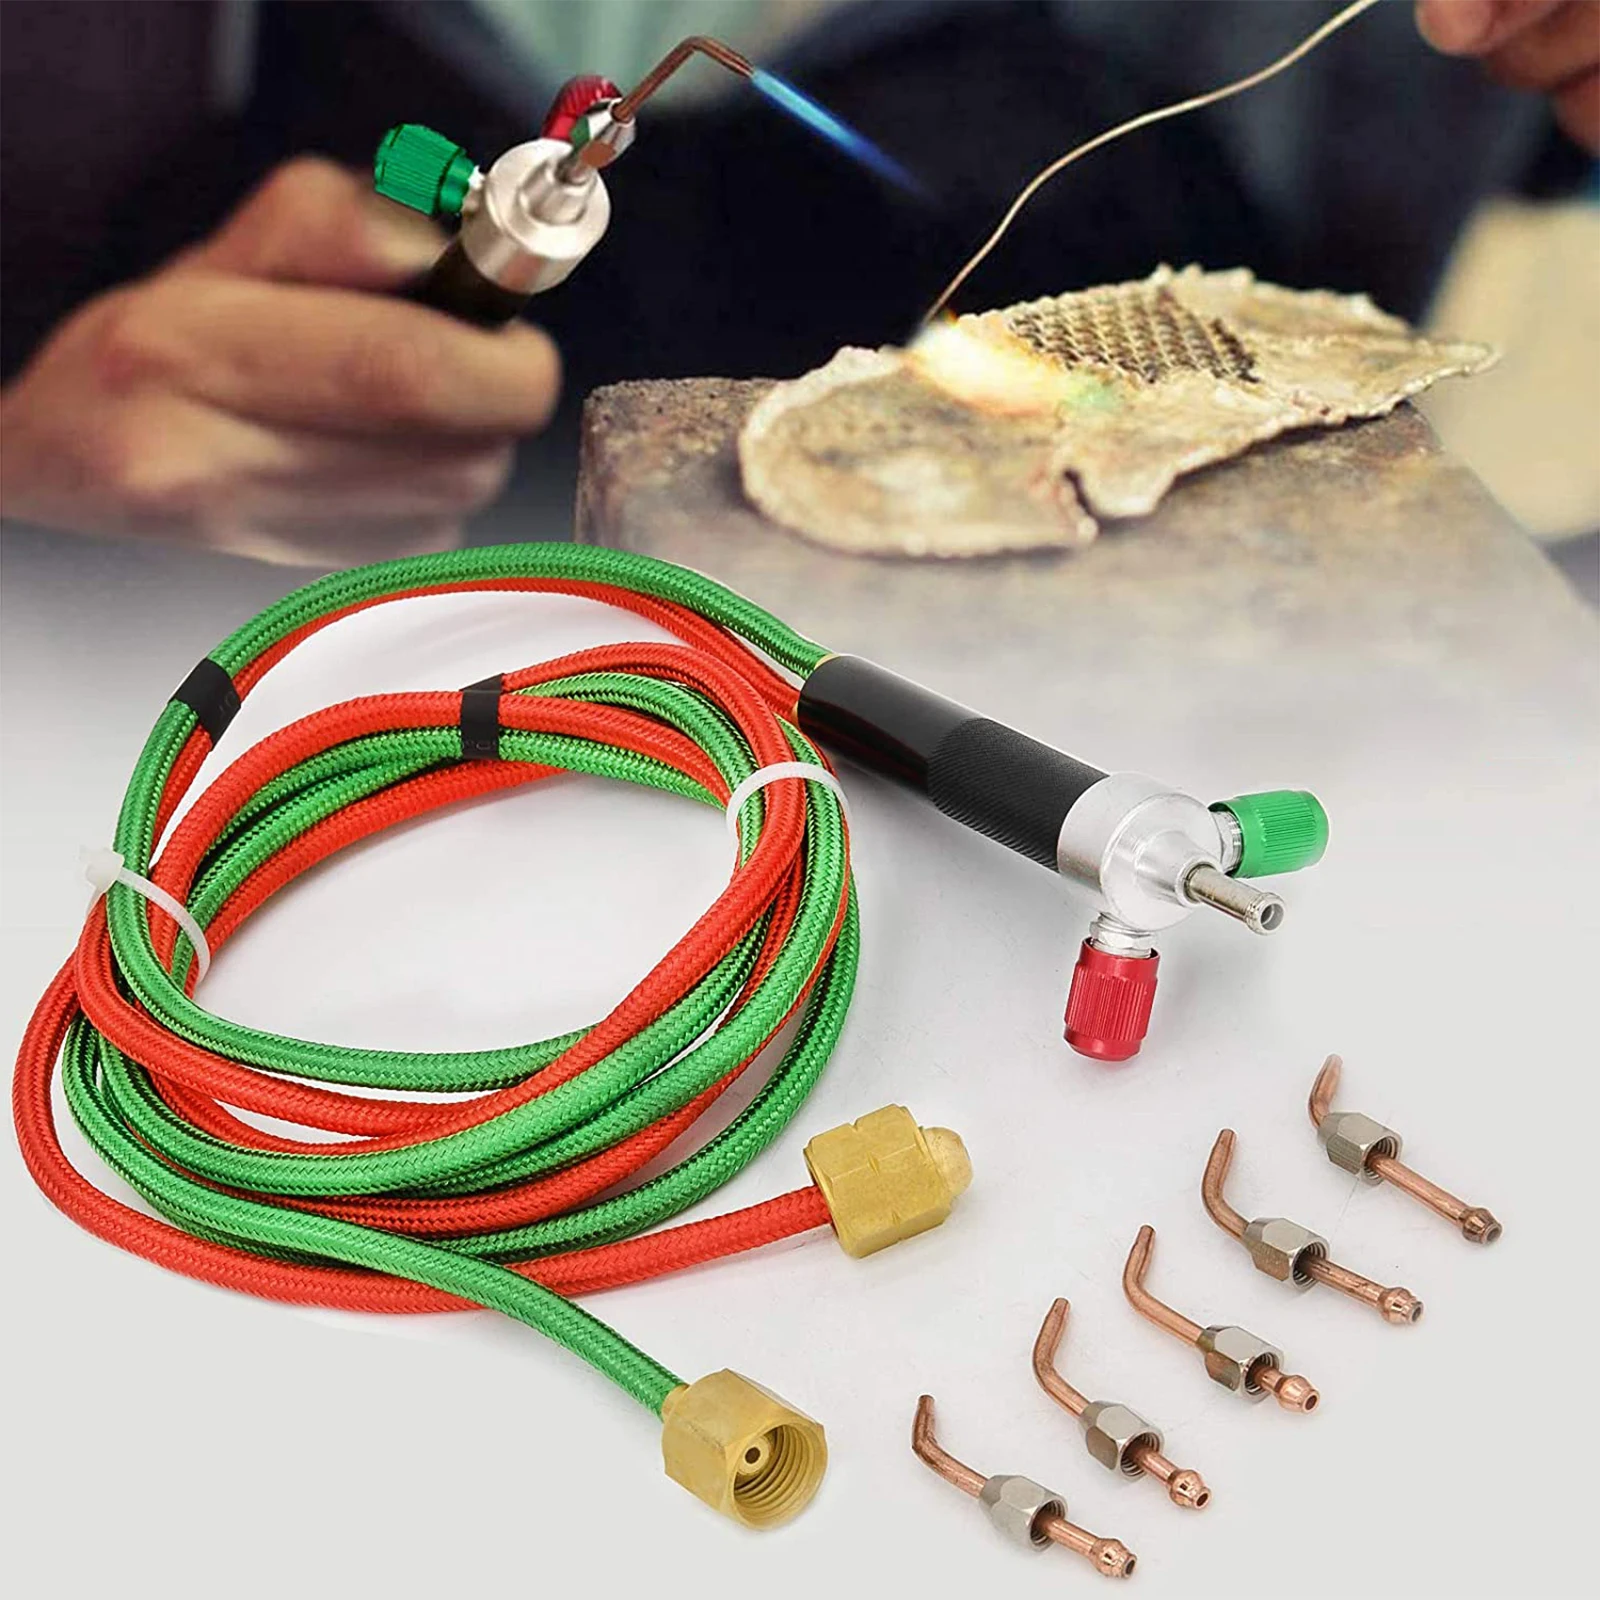 Jewelry Torch Soldering Kit Mini Gases Little Torch Soldering